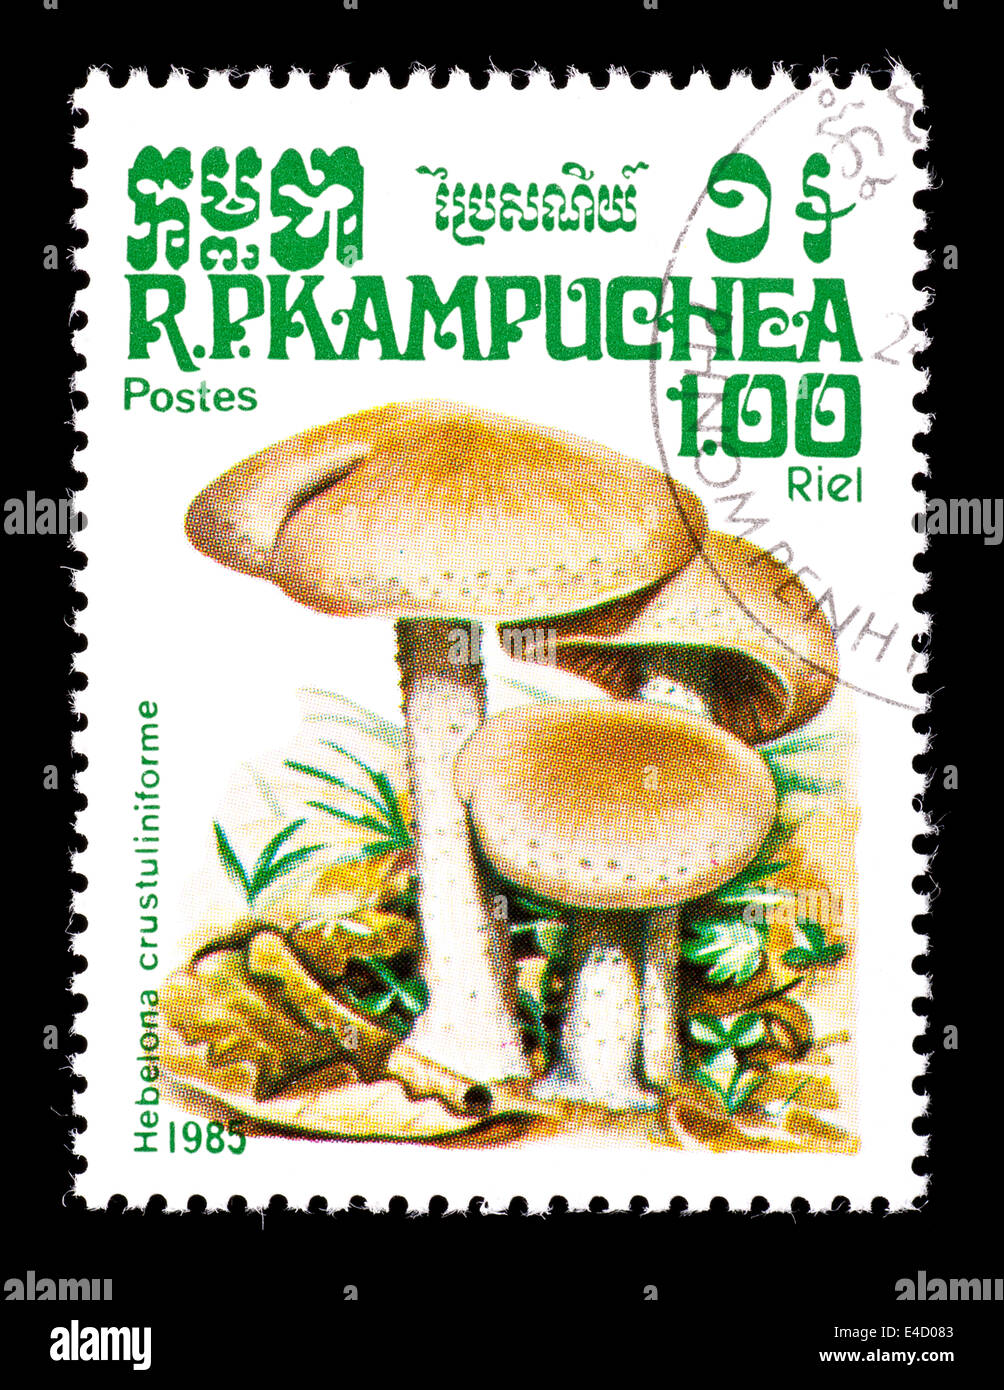 Postage stamp from Kampuchea (Cambodia) depicting poison pie or fairy cake mushrooms (Hebeloma crustuliniforme) Stock Photo